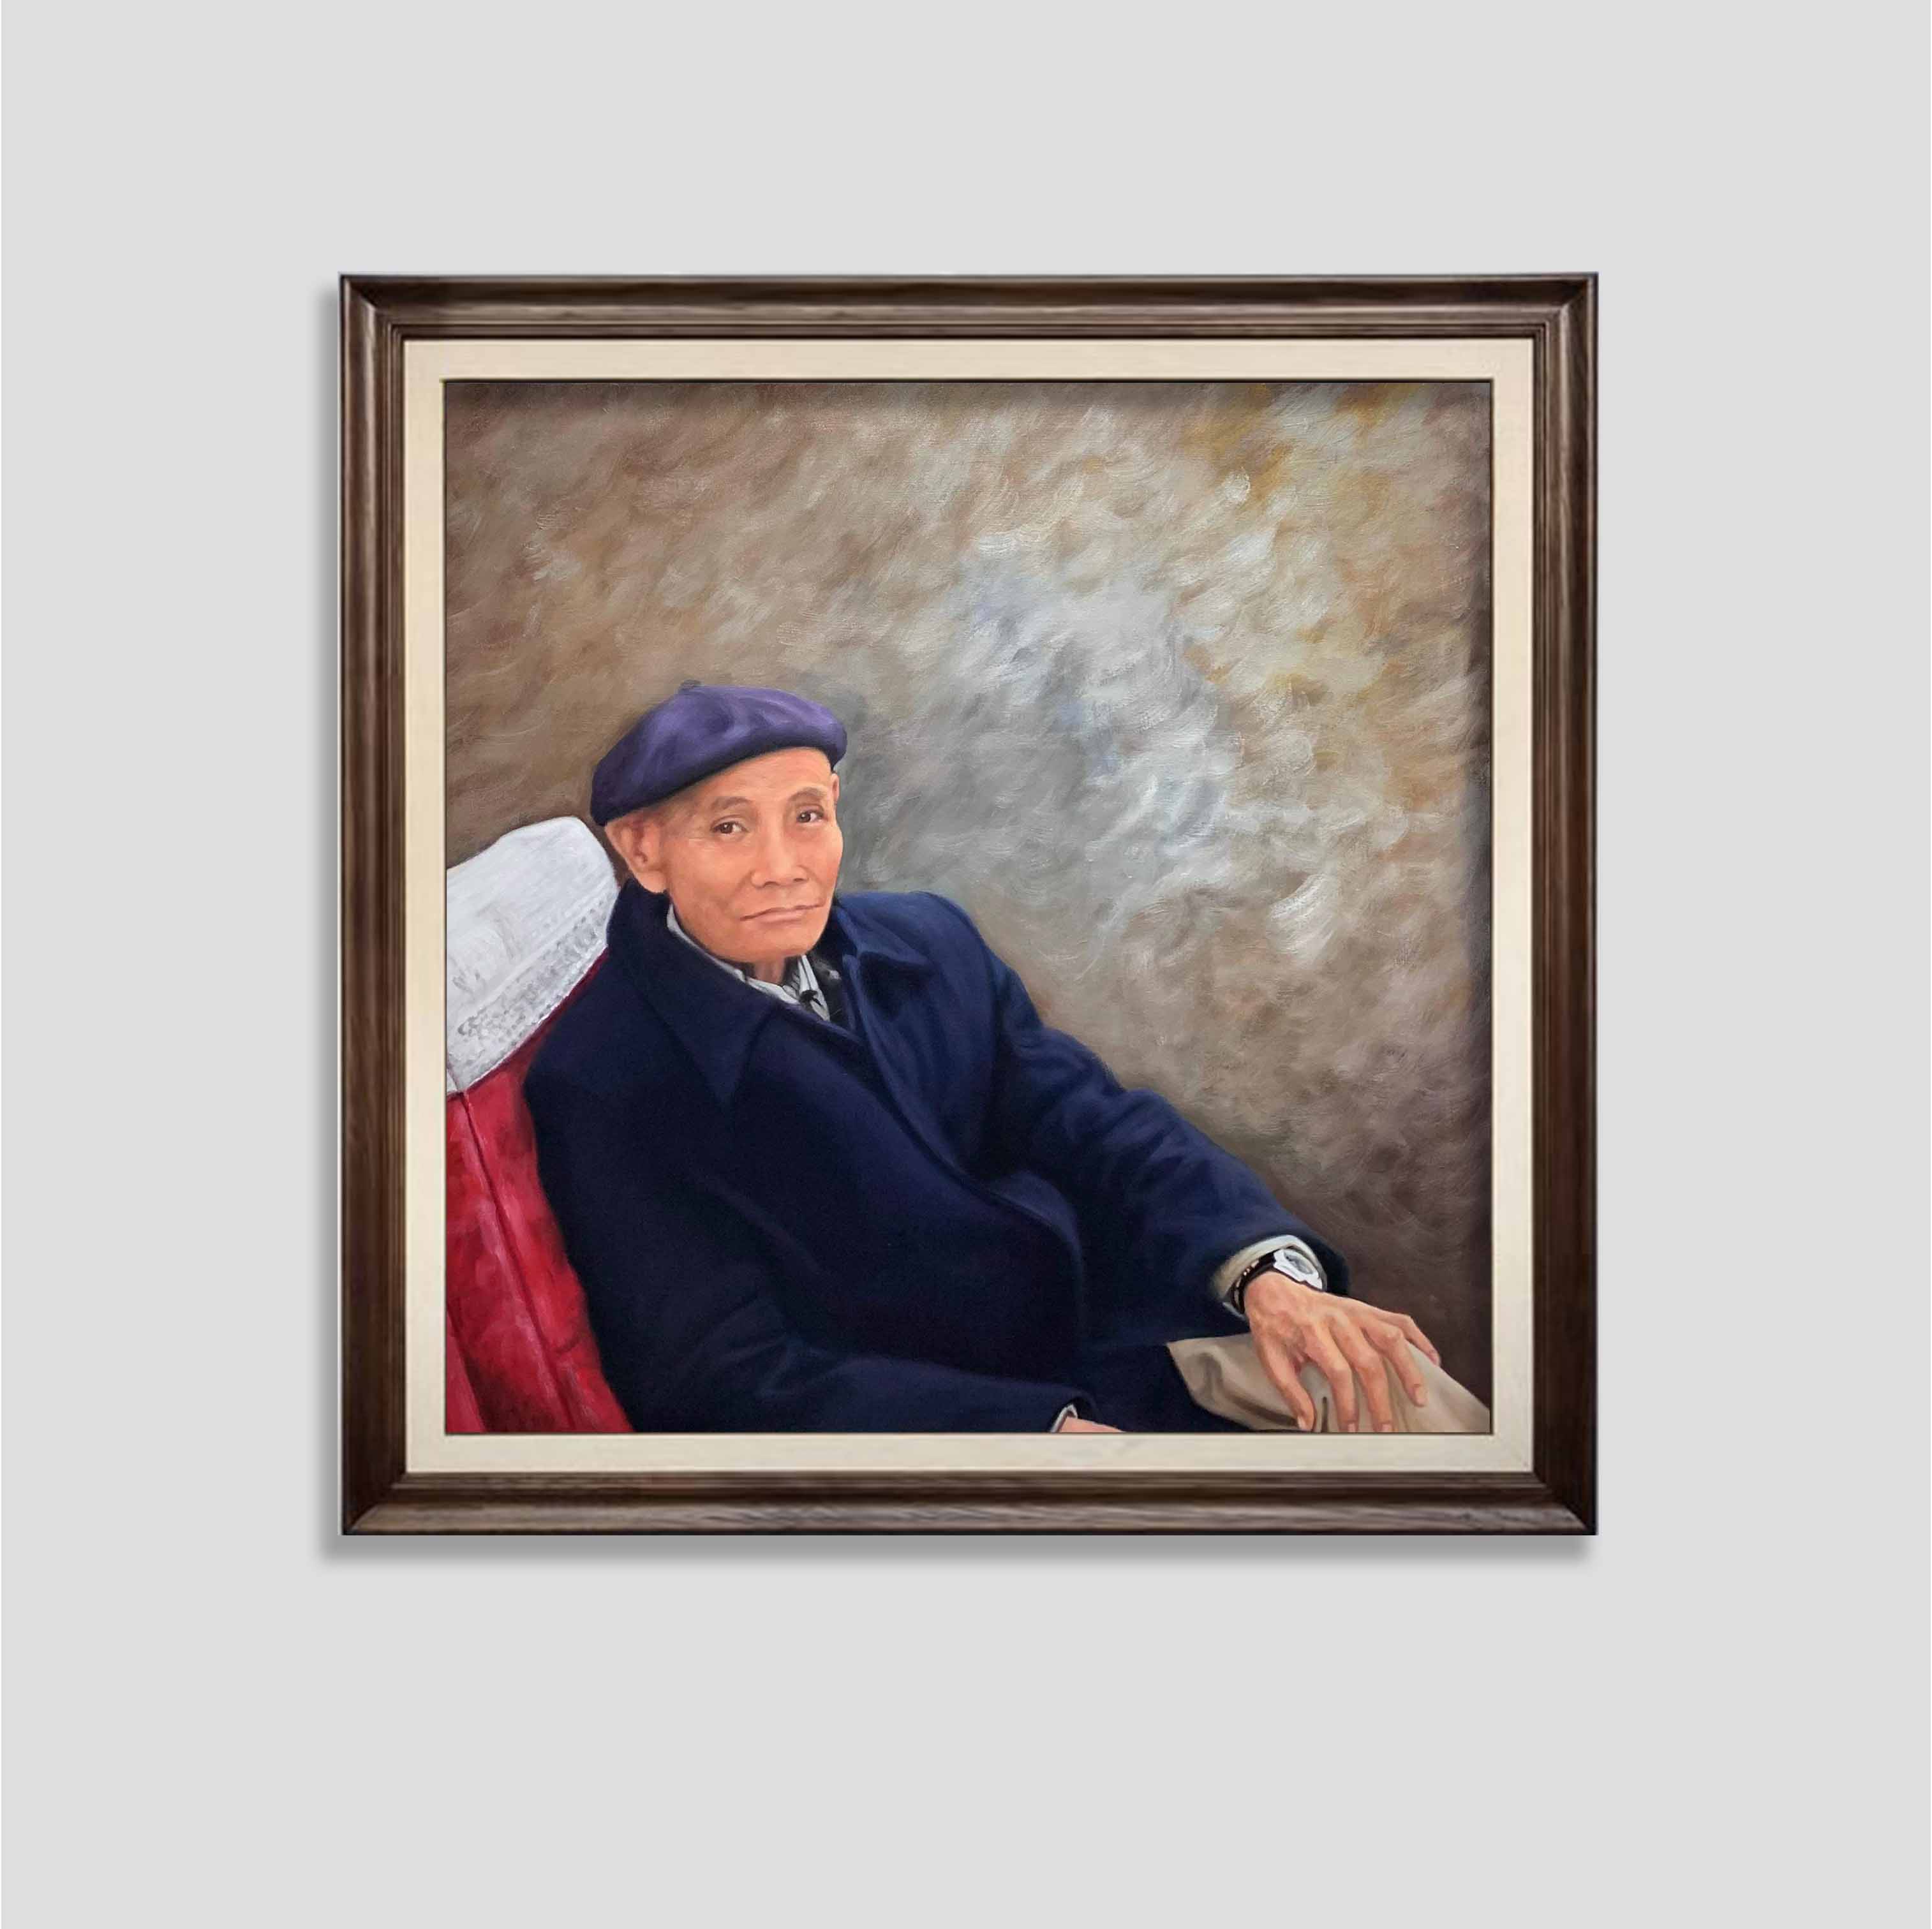 Copy portrait from photo to high quality oil painting - TSD570LHAR